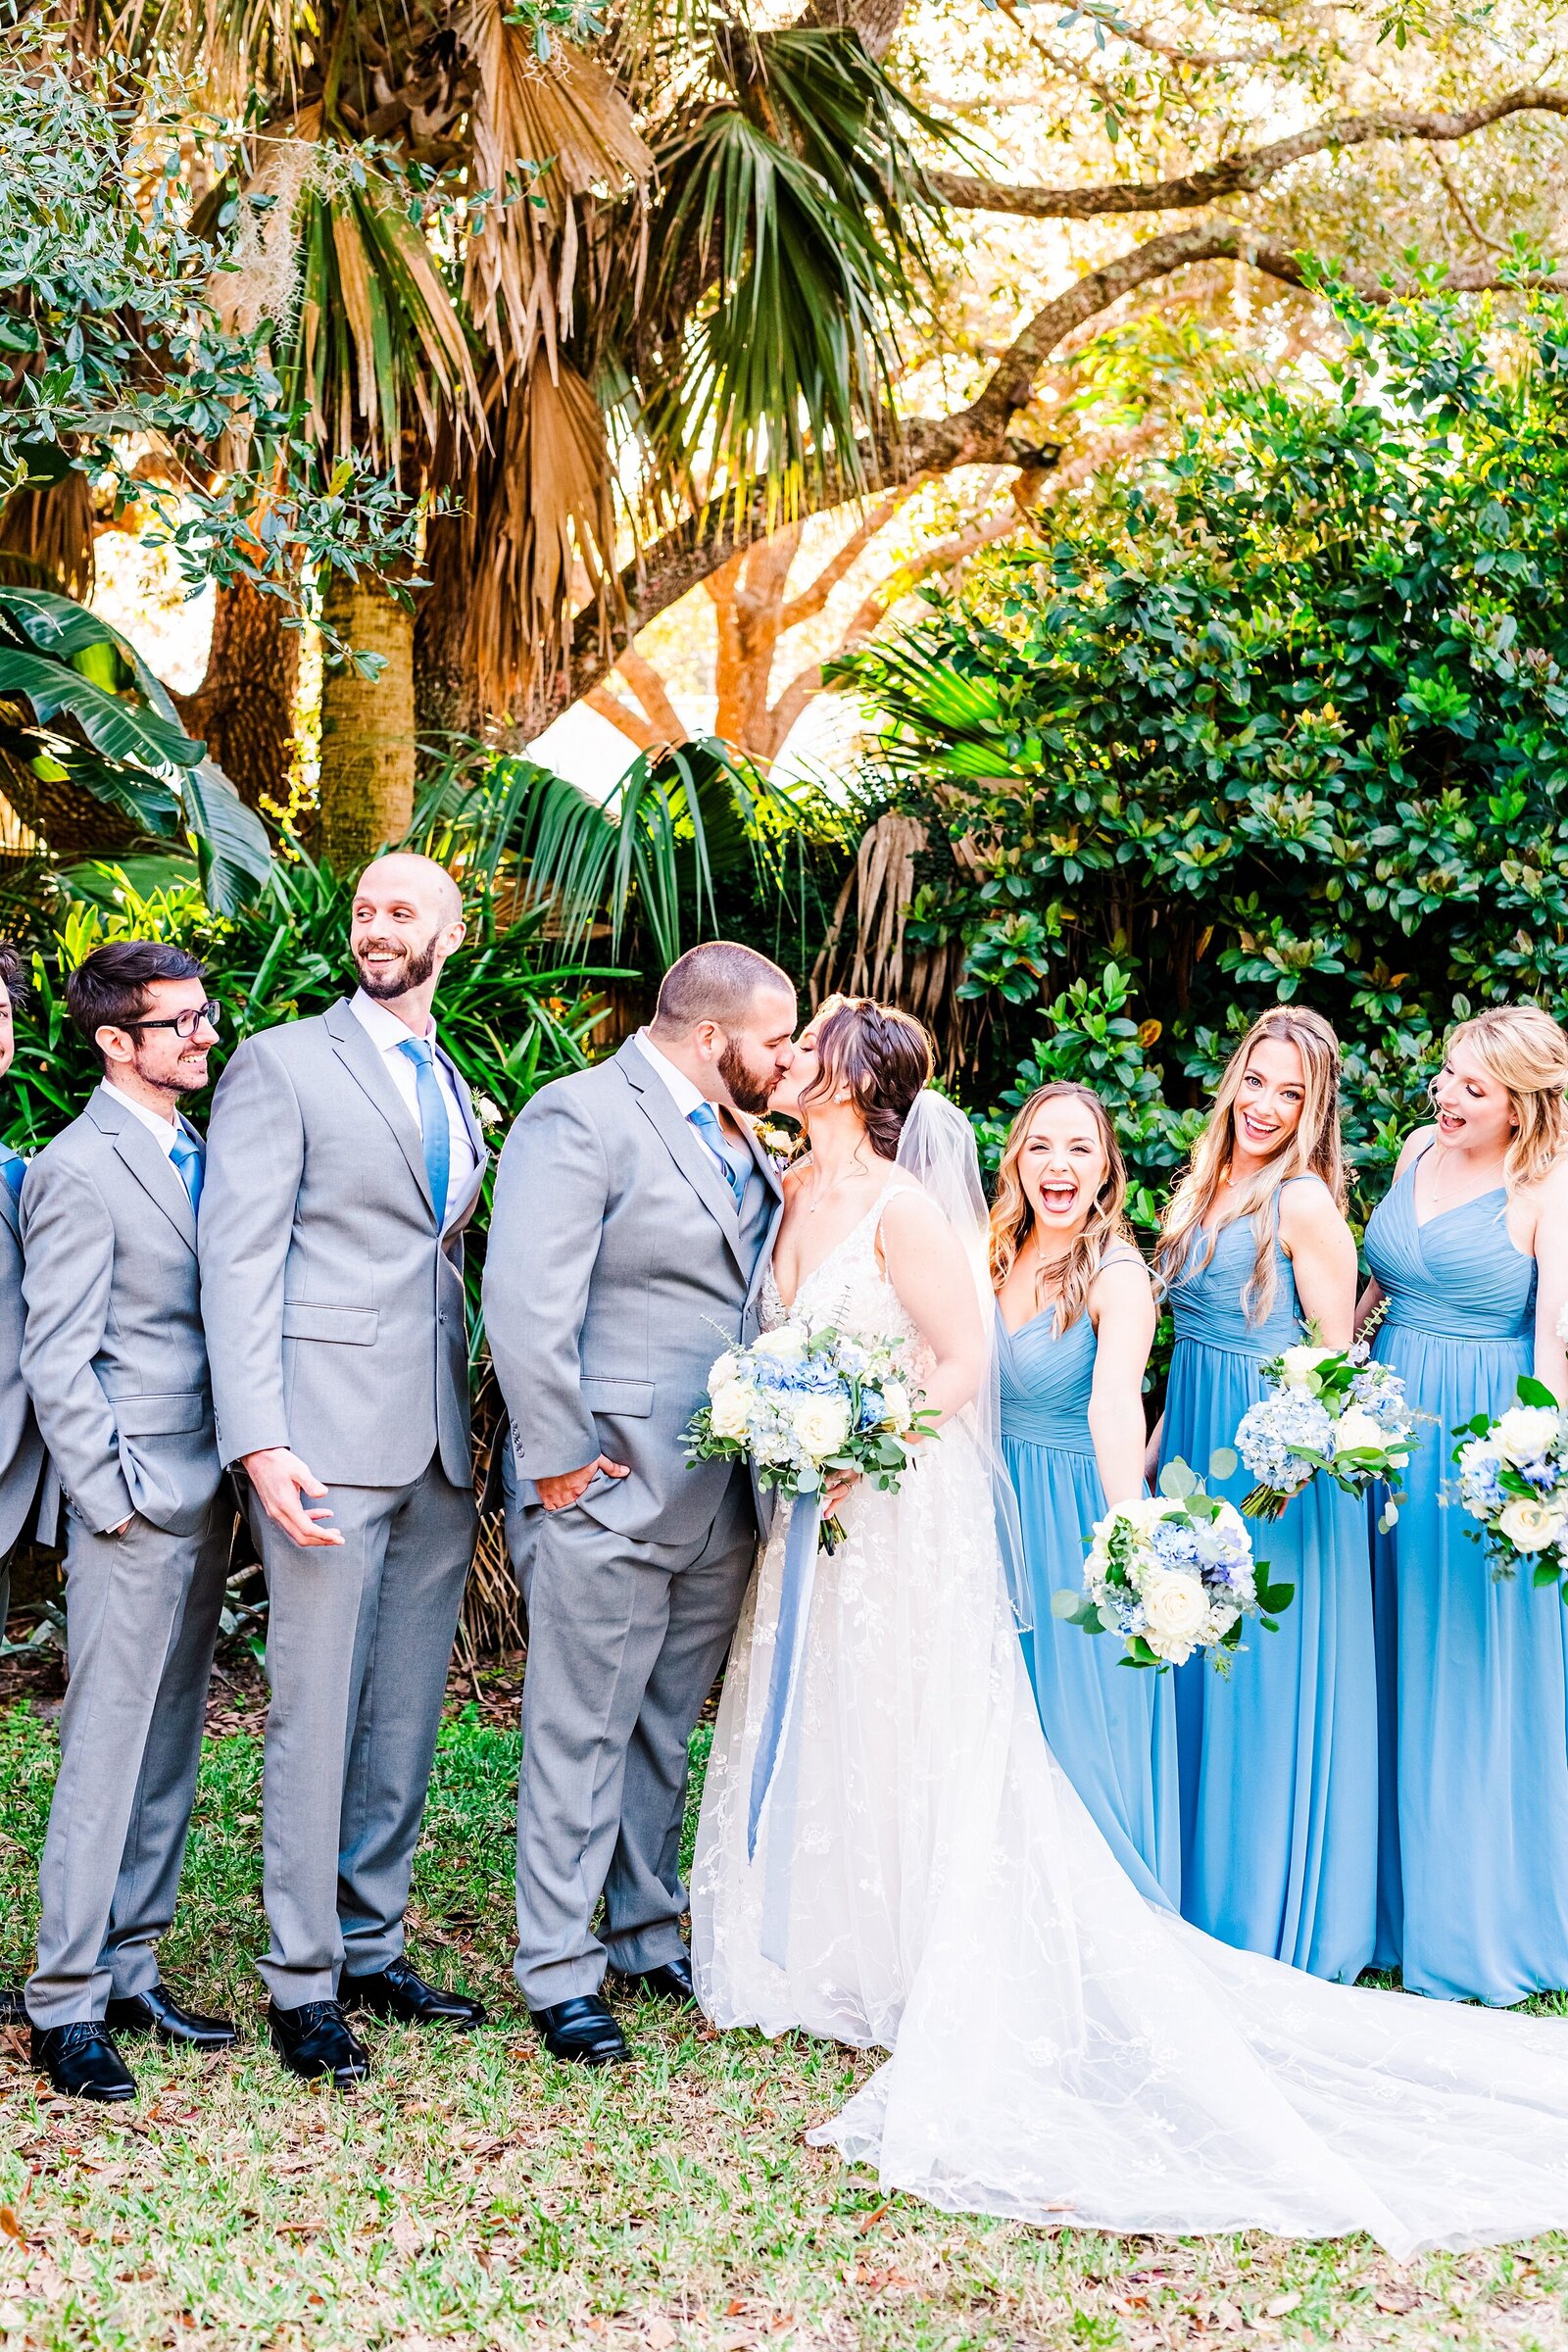 Bridal Party | The Delamater House Wedding | Chynna Pacheco Photography-619